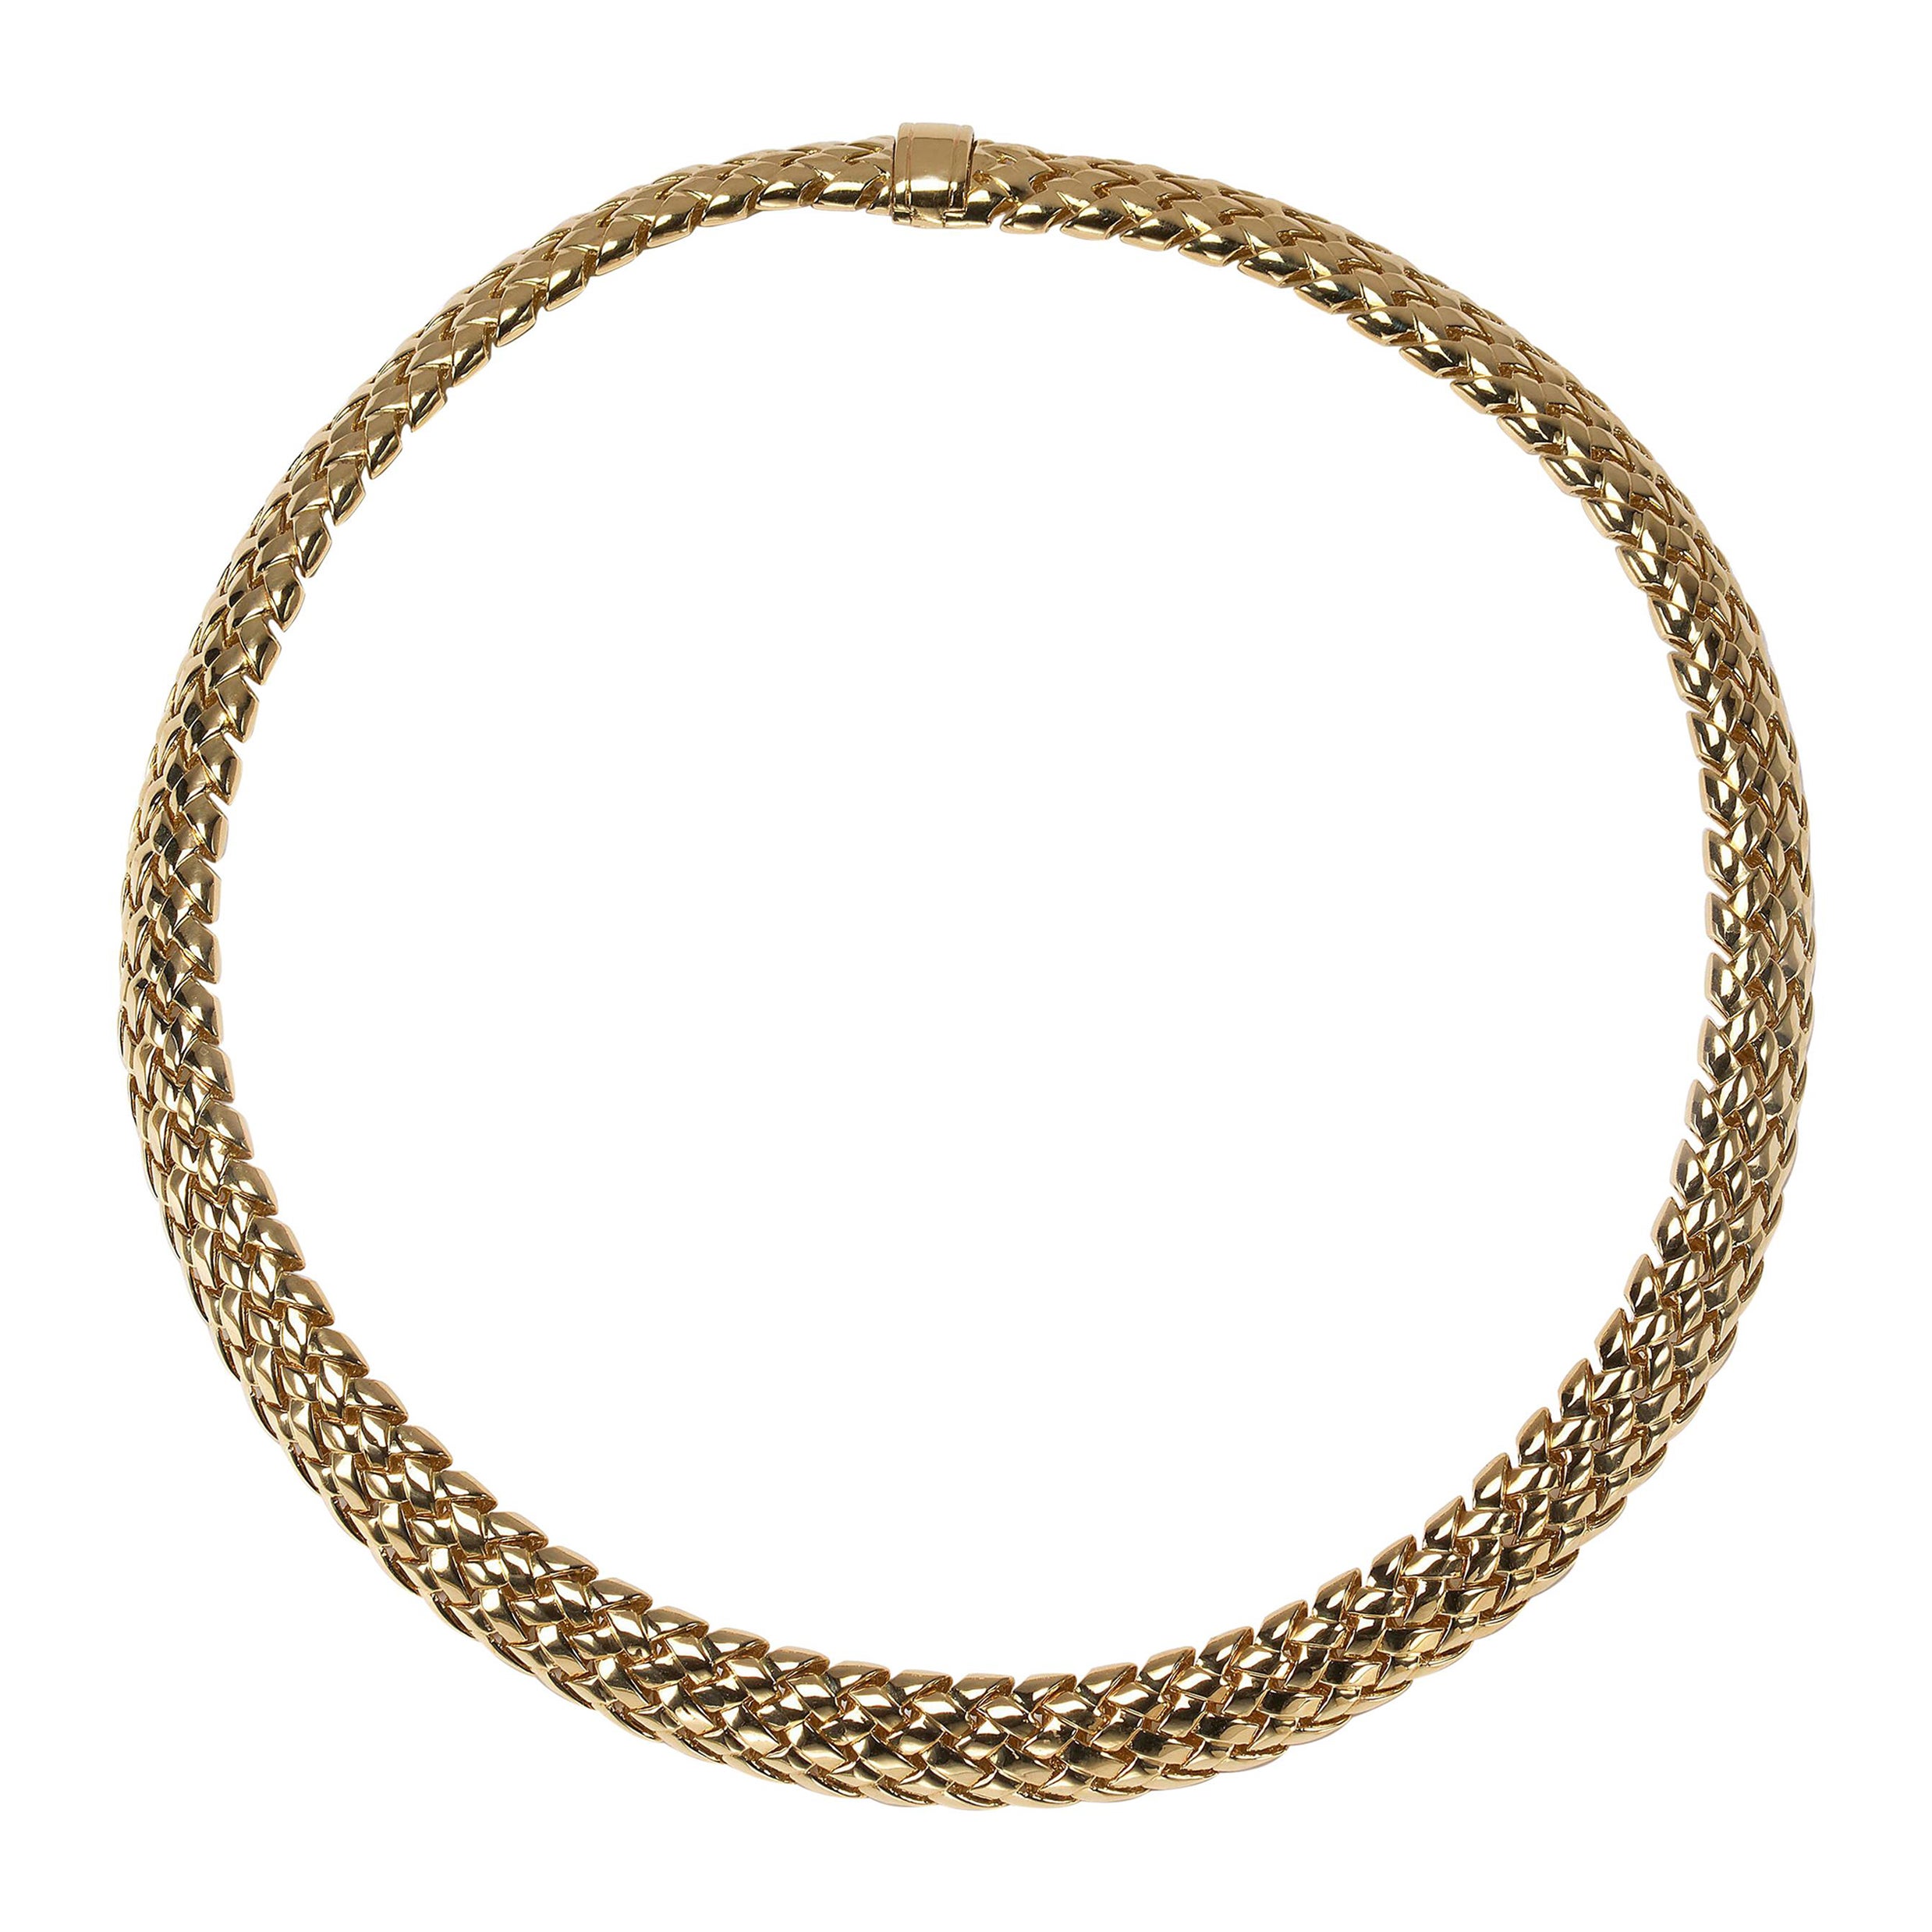 Tiffany & Co. Gold "Vannerie" Necklace